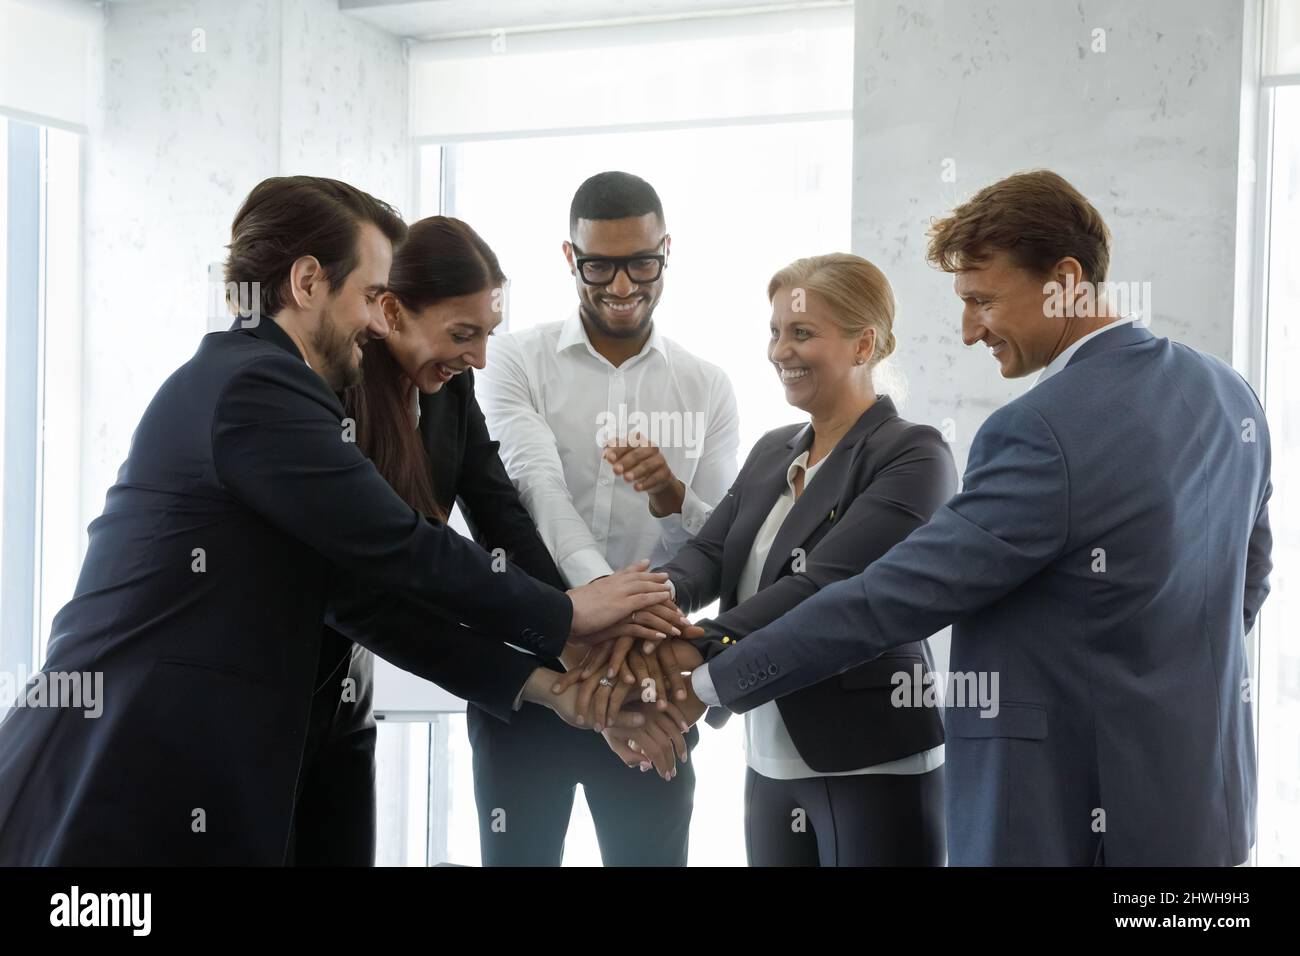 Happy motivated diverse business people showing power of teamwork. Stock Photo